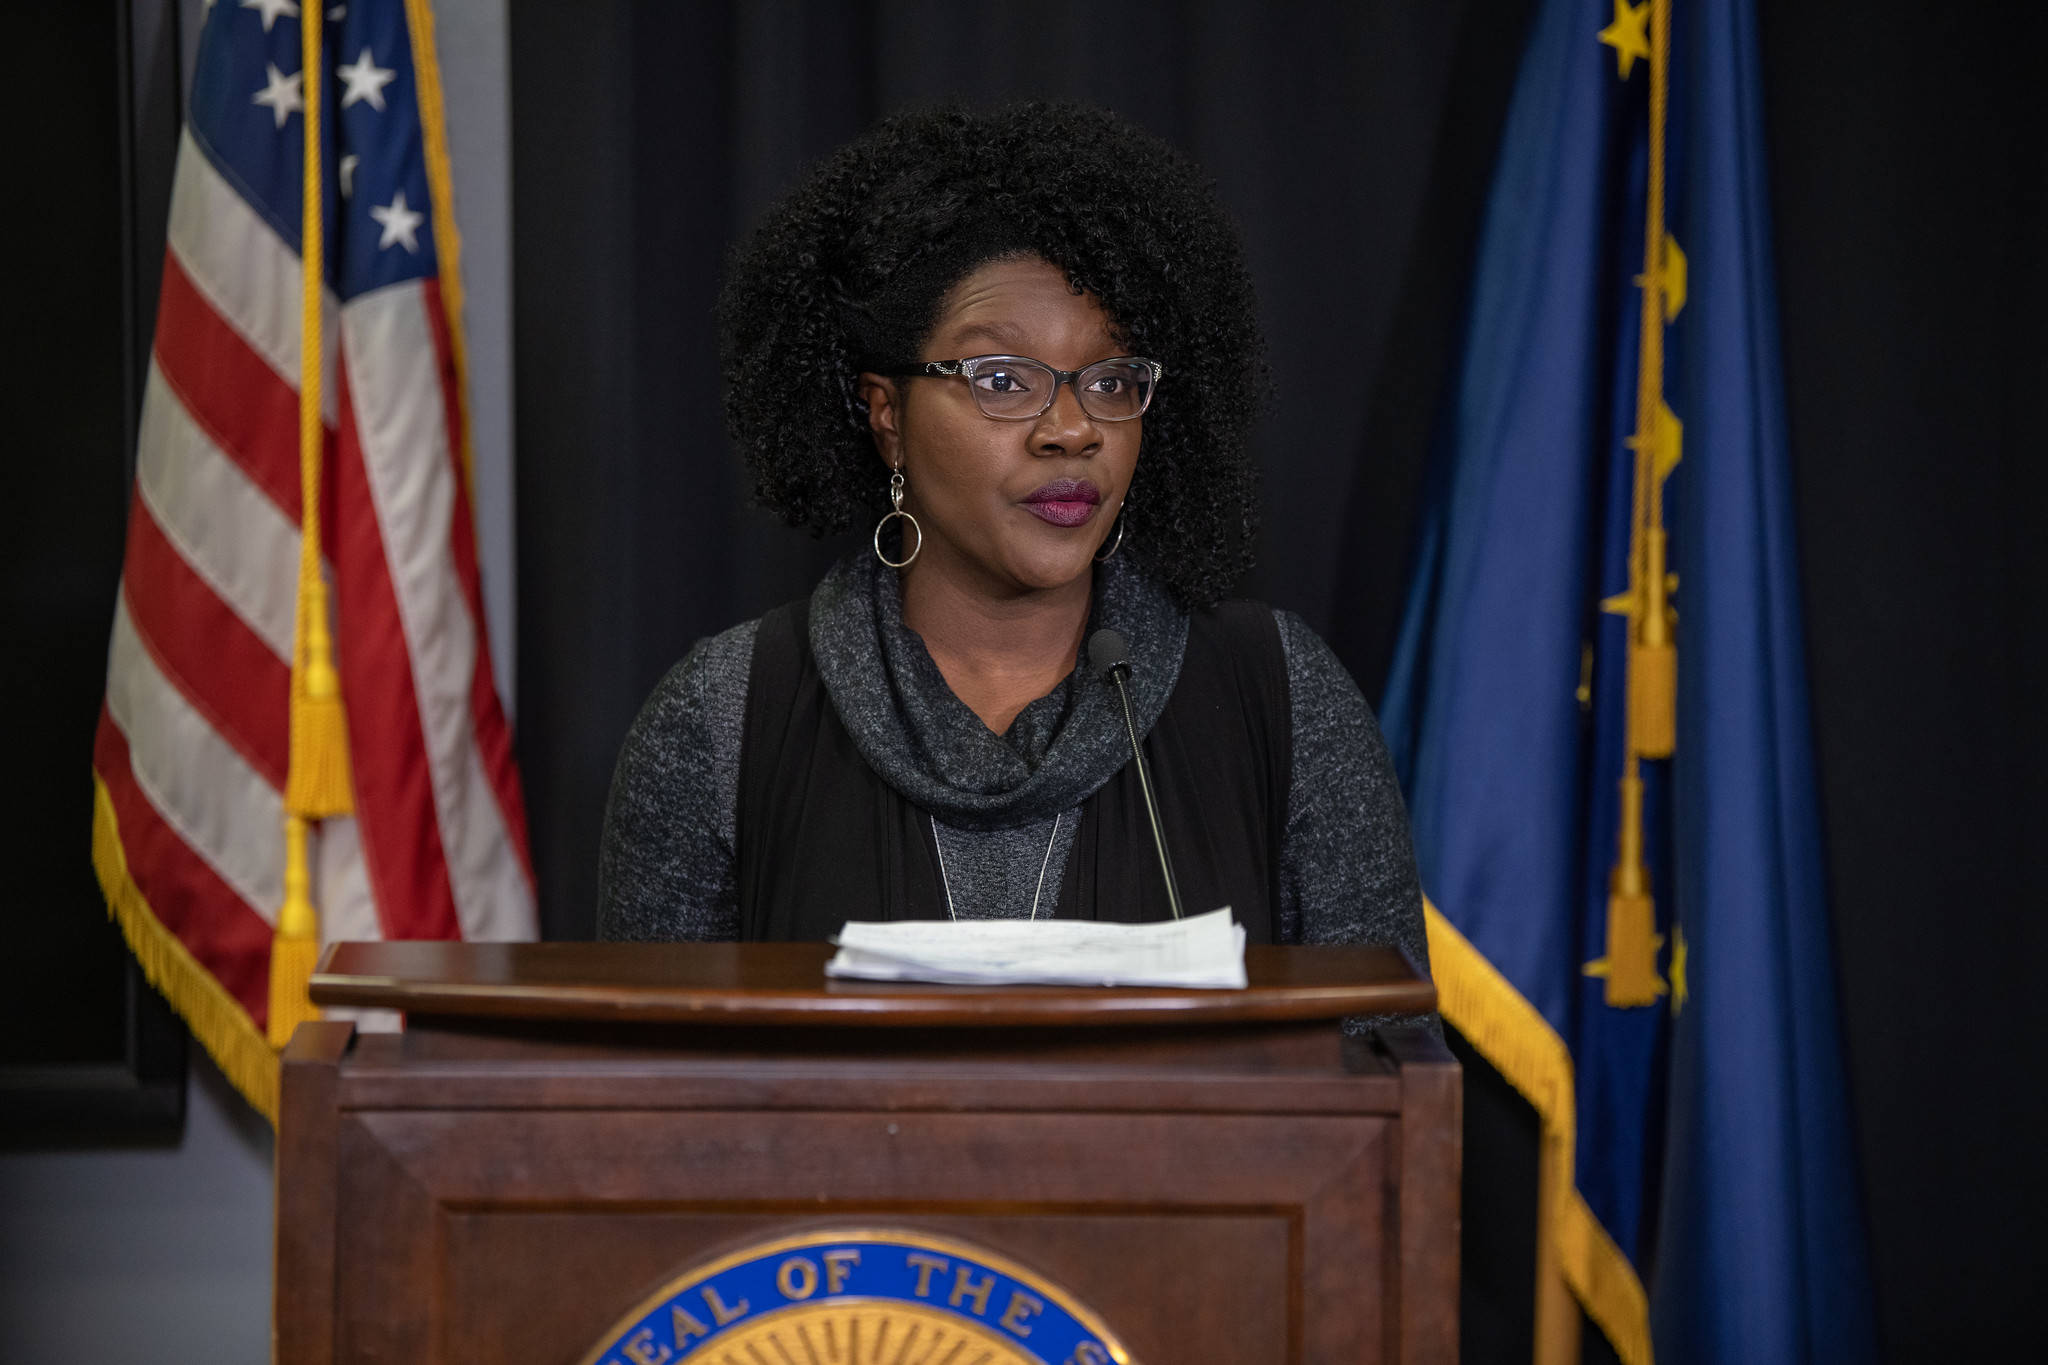 Dr. Tamika Ledbetter, commissioner of the Alaska Department of Labor and Workforce Development, participates in a press conference in Anchorage, Alaska, on March 31, 2020. (Courtesy photo)